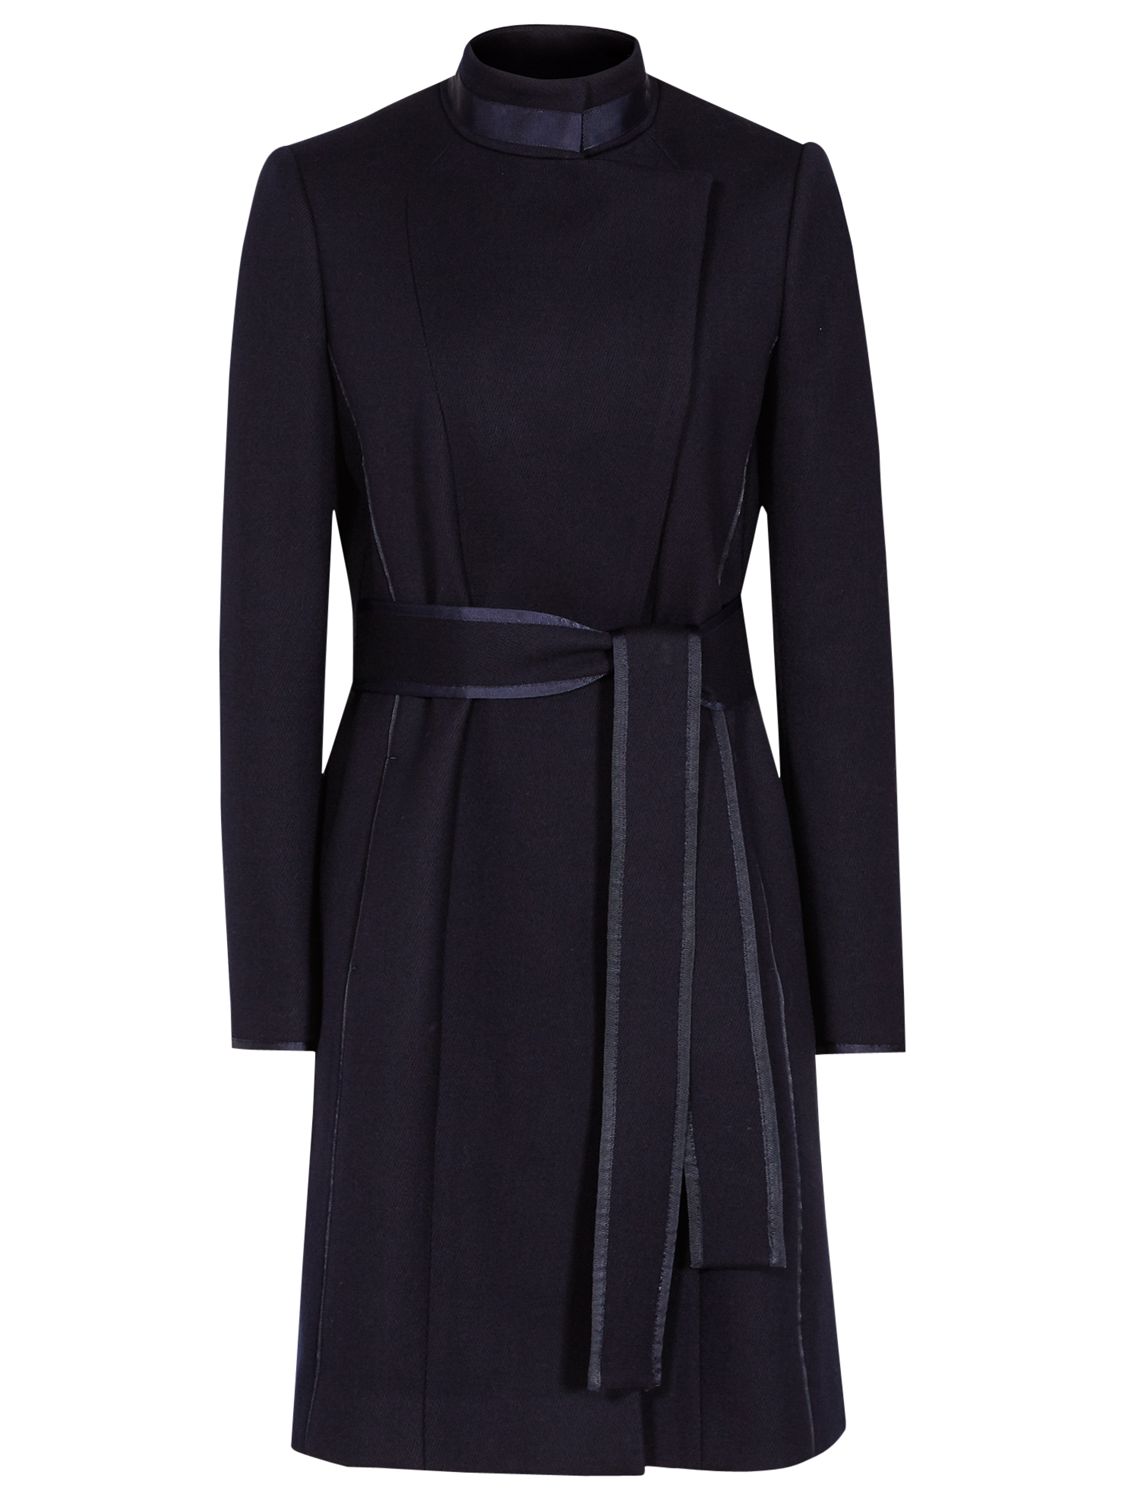 Reiss Lucille Belted Long Wool Coat, Navy